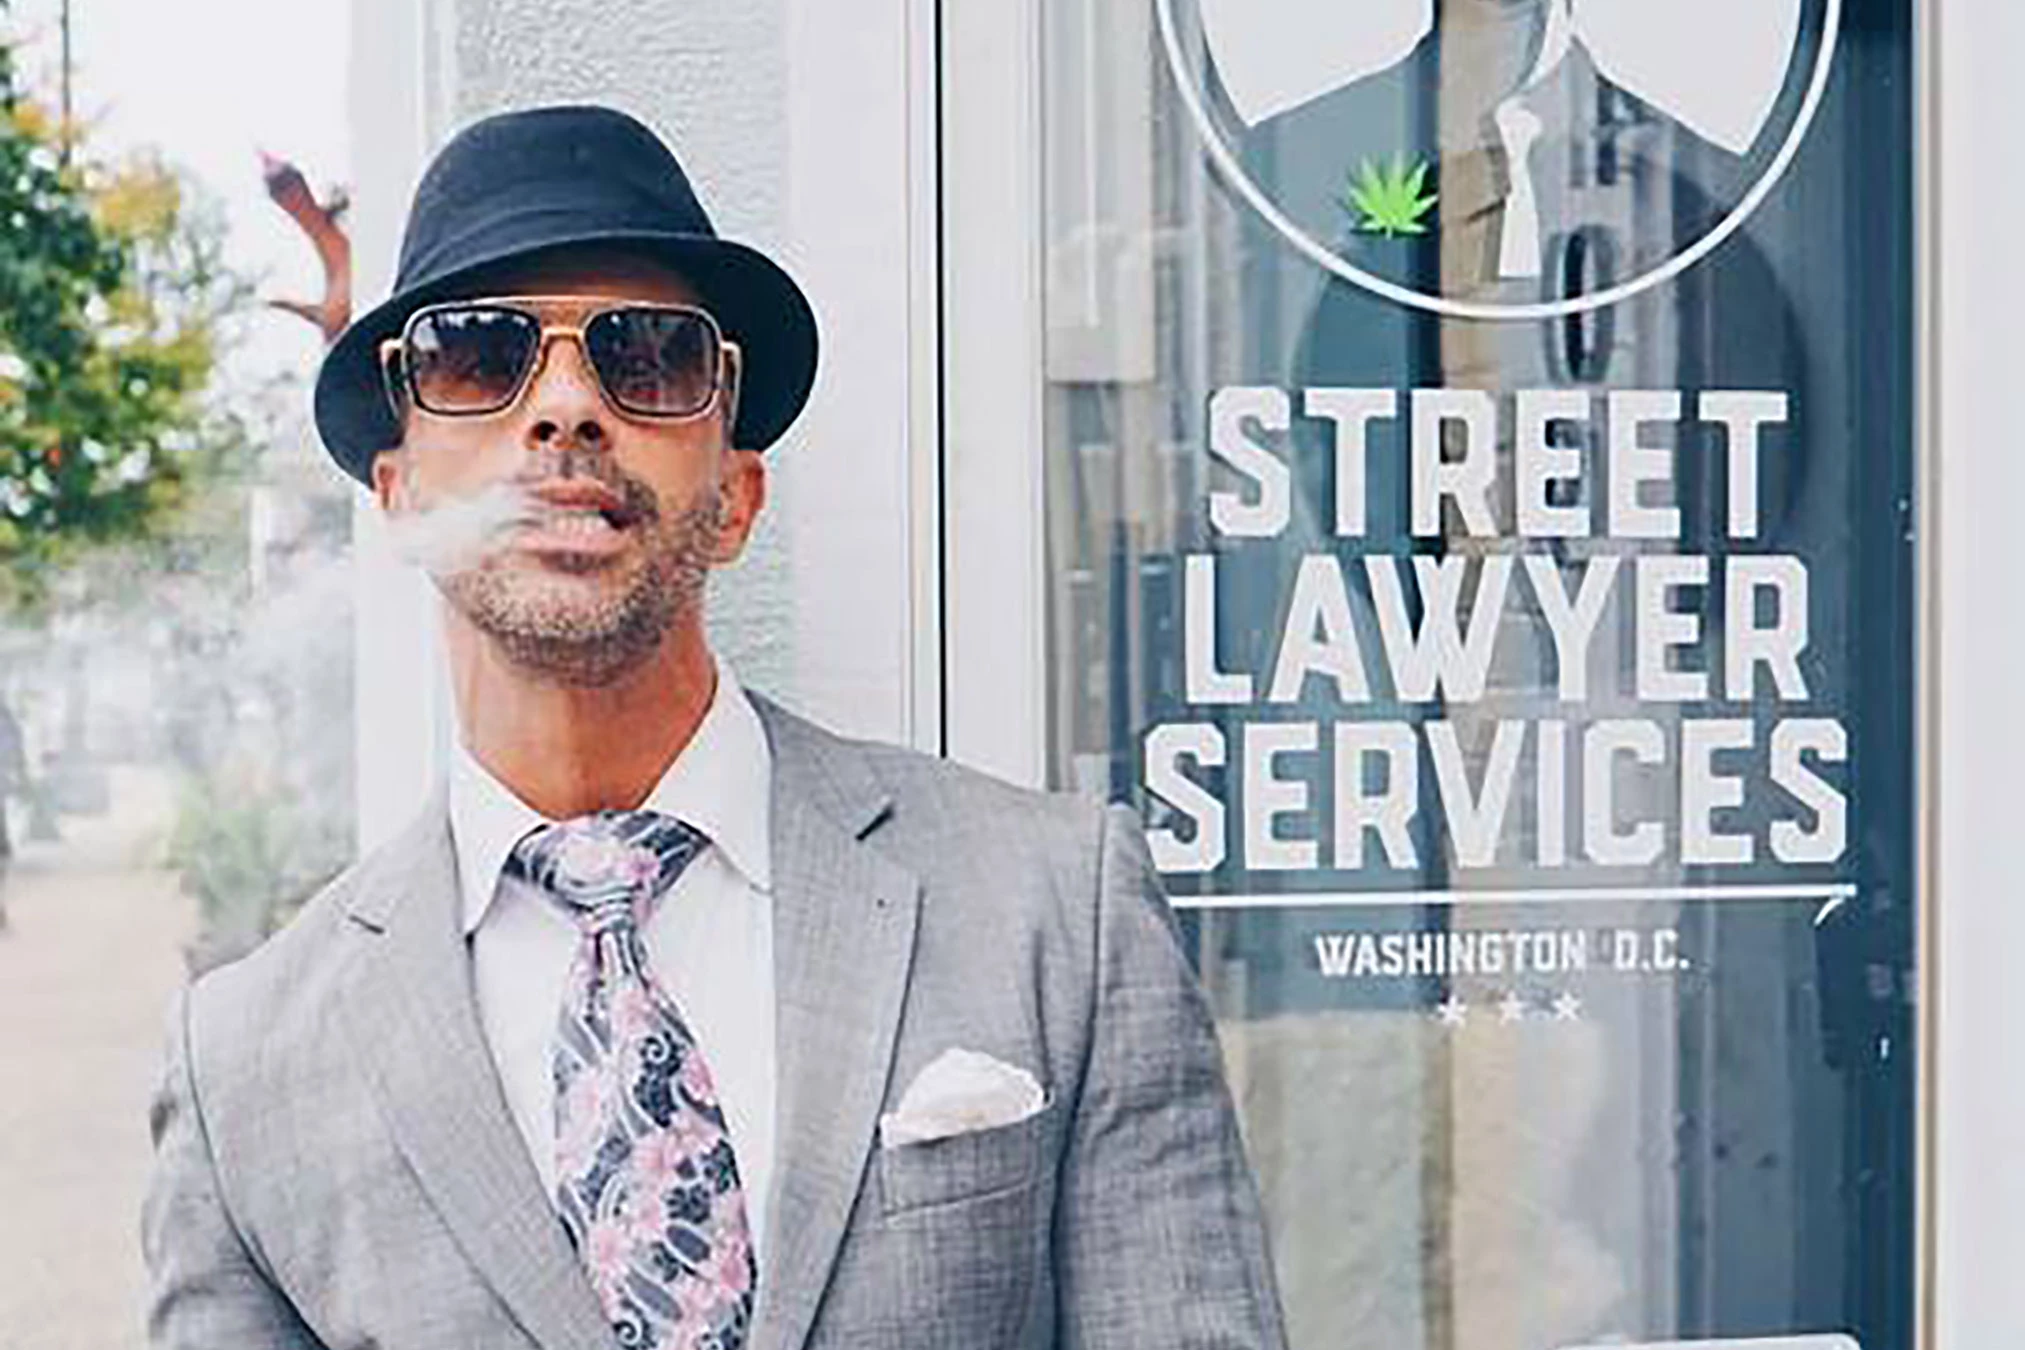 Street Lawyer Services